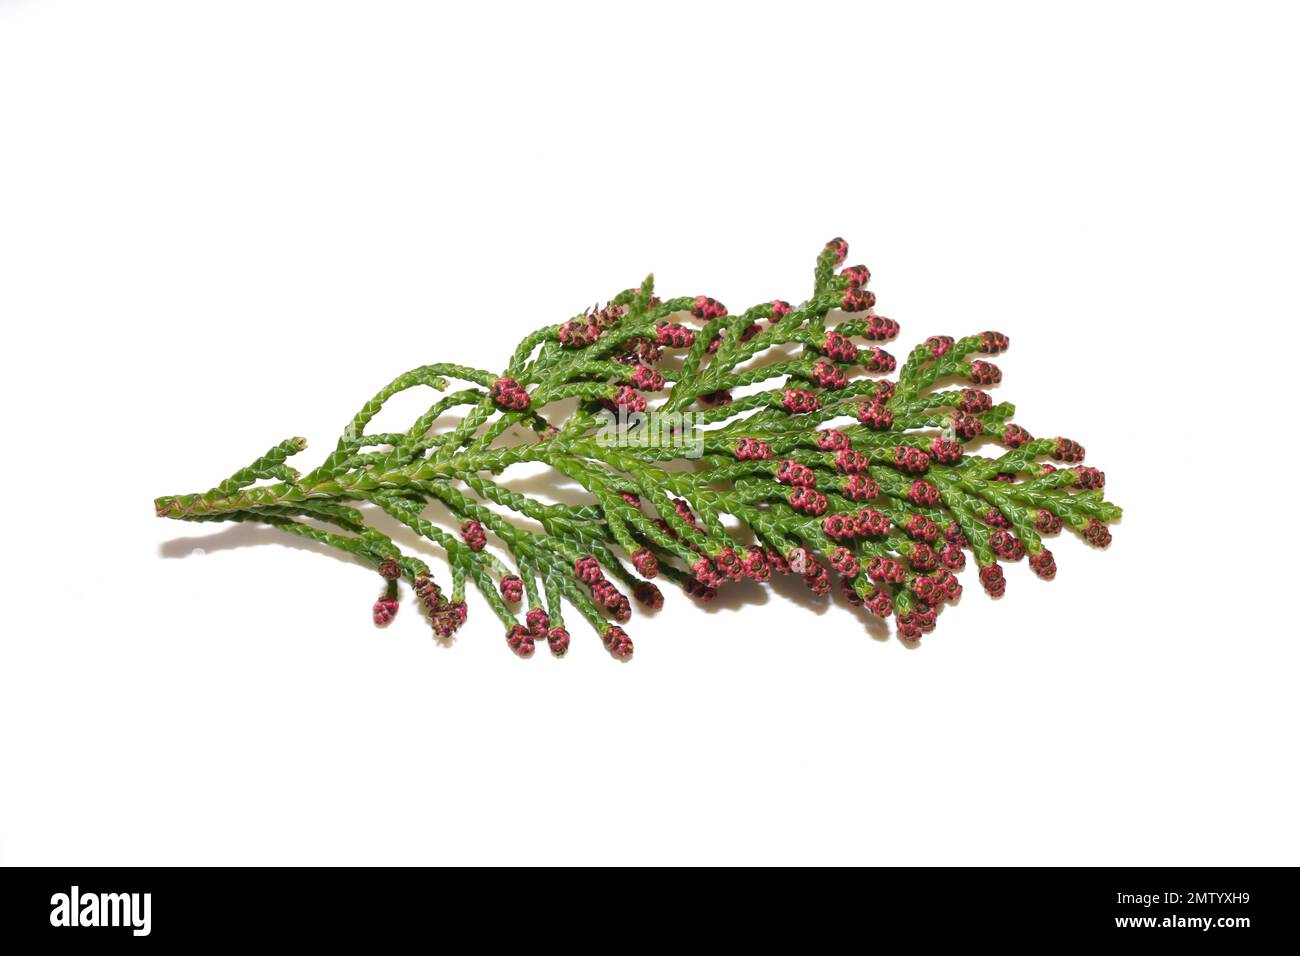 Red male flowers on a Lawsons cypress Chamaecyparis lawsoniana isolated on white background Stock Photo